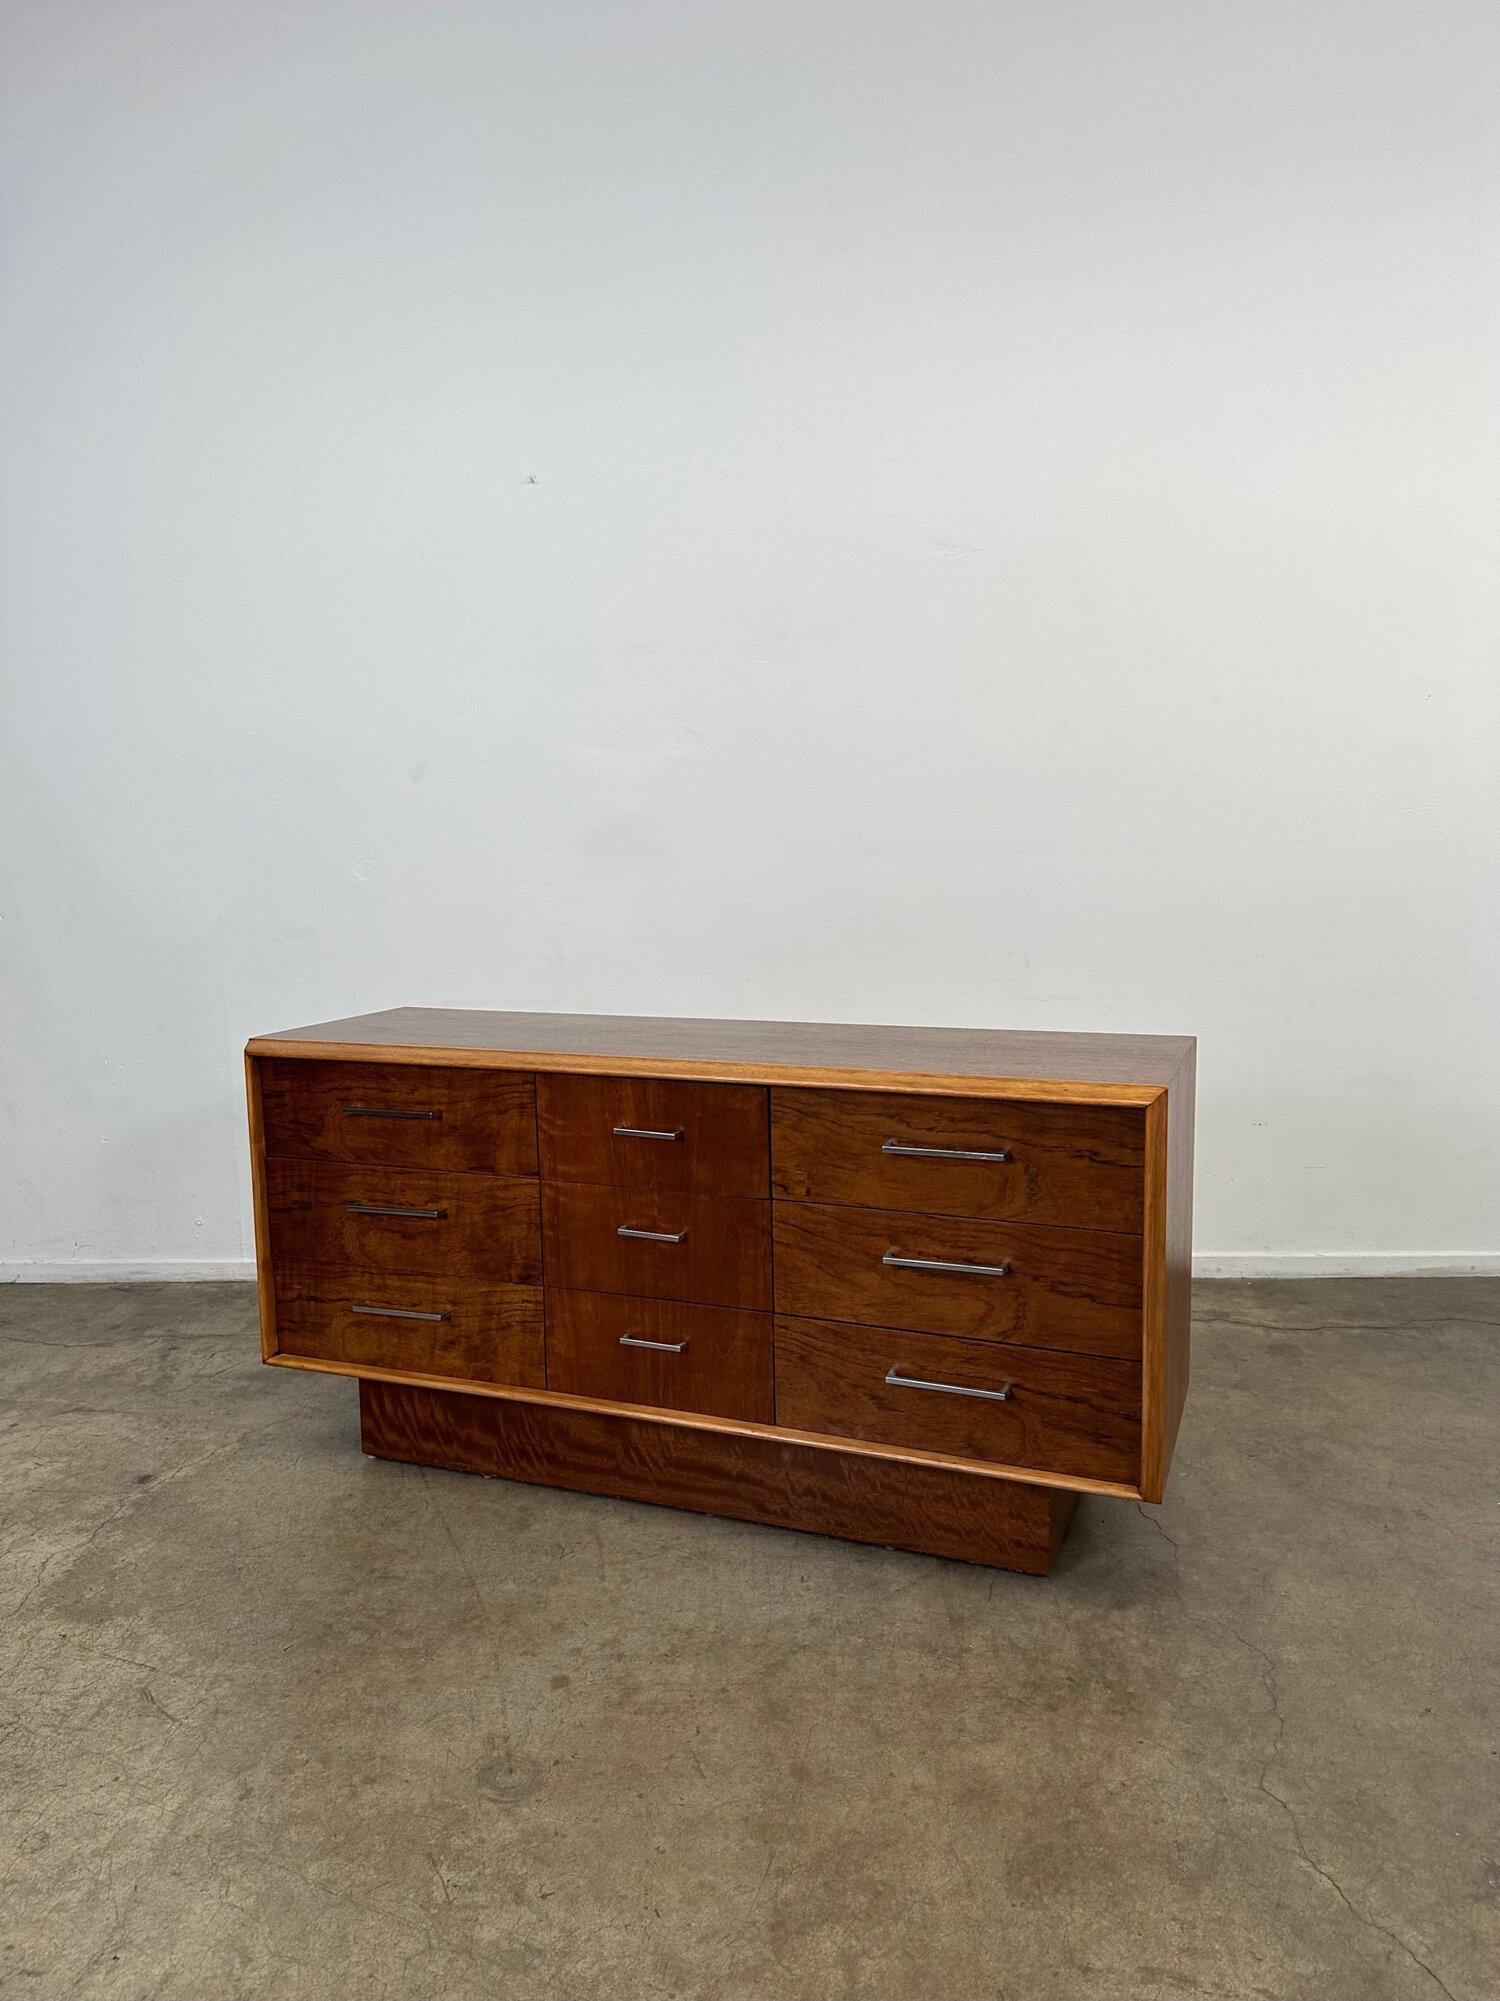 W58 D18 H28.5

Petite dresser with three large drawers and three smaller drawers on the side. This dresser features clean chrome hardware with dove tail drawers. The walnut plinth base is recessed and give the piece a brutalist style. This piece has